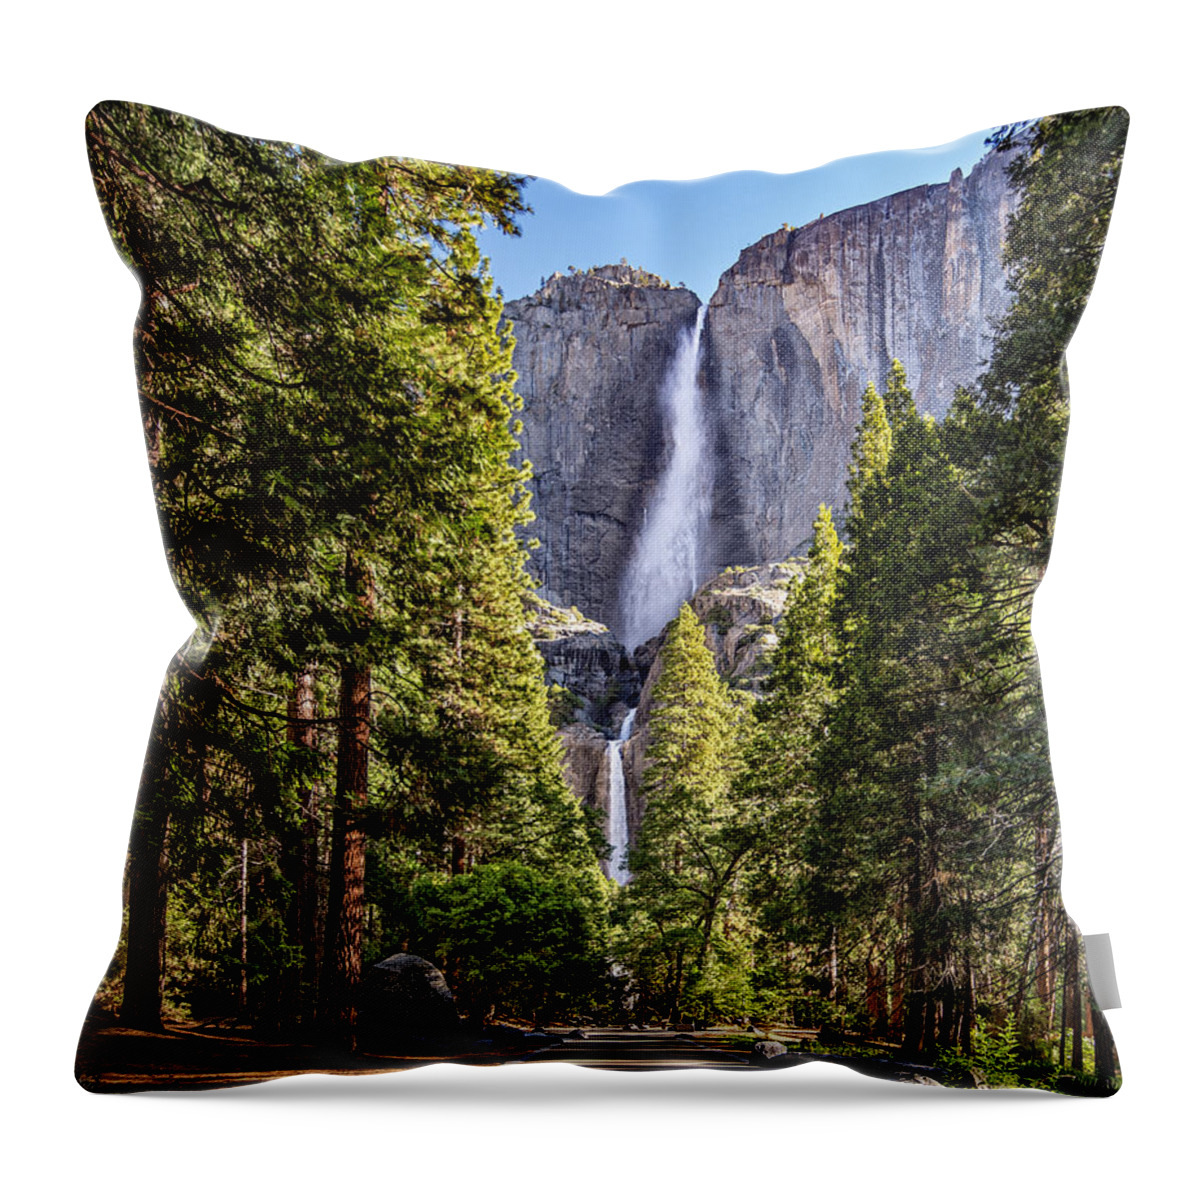 Yosemite Falls Throw Pillow featuring the photograph Yosemite Falls 4.0 by Phil Abrams